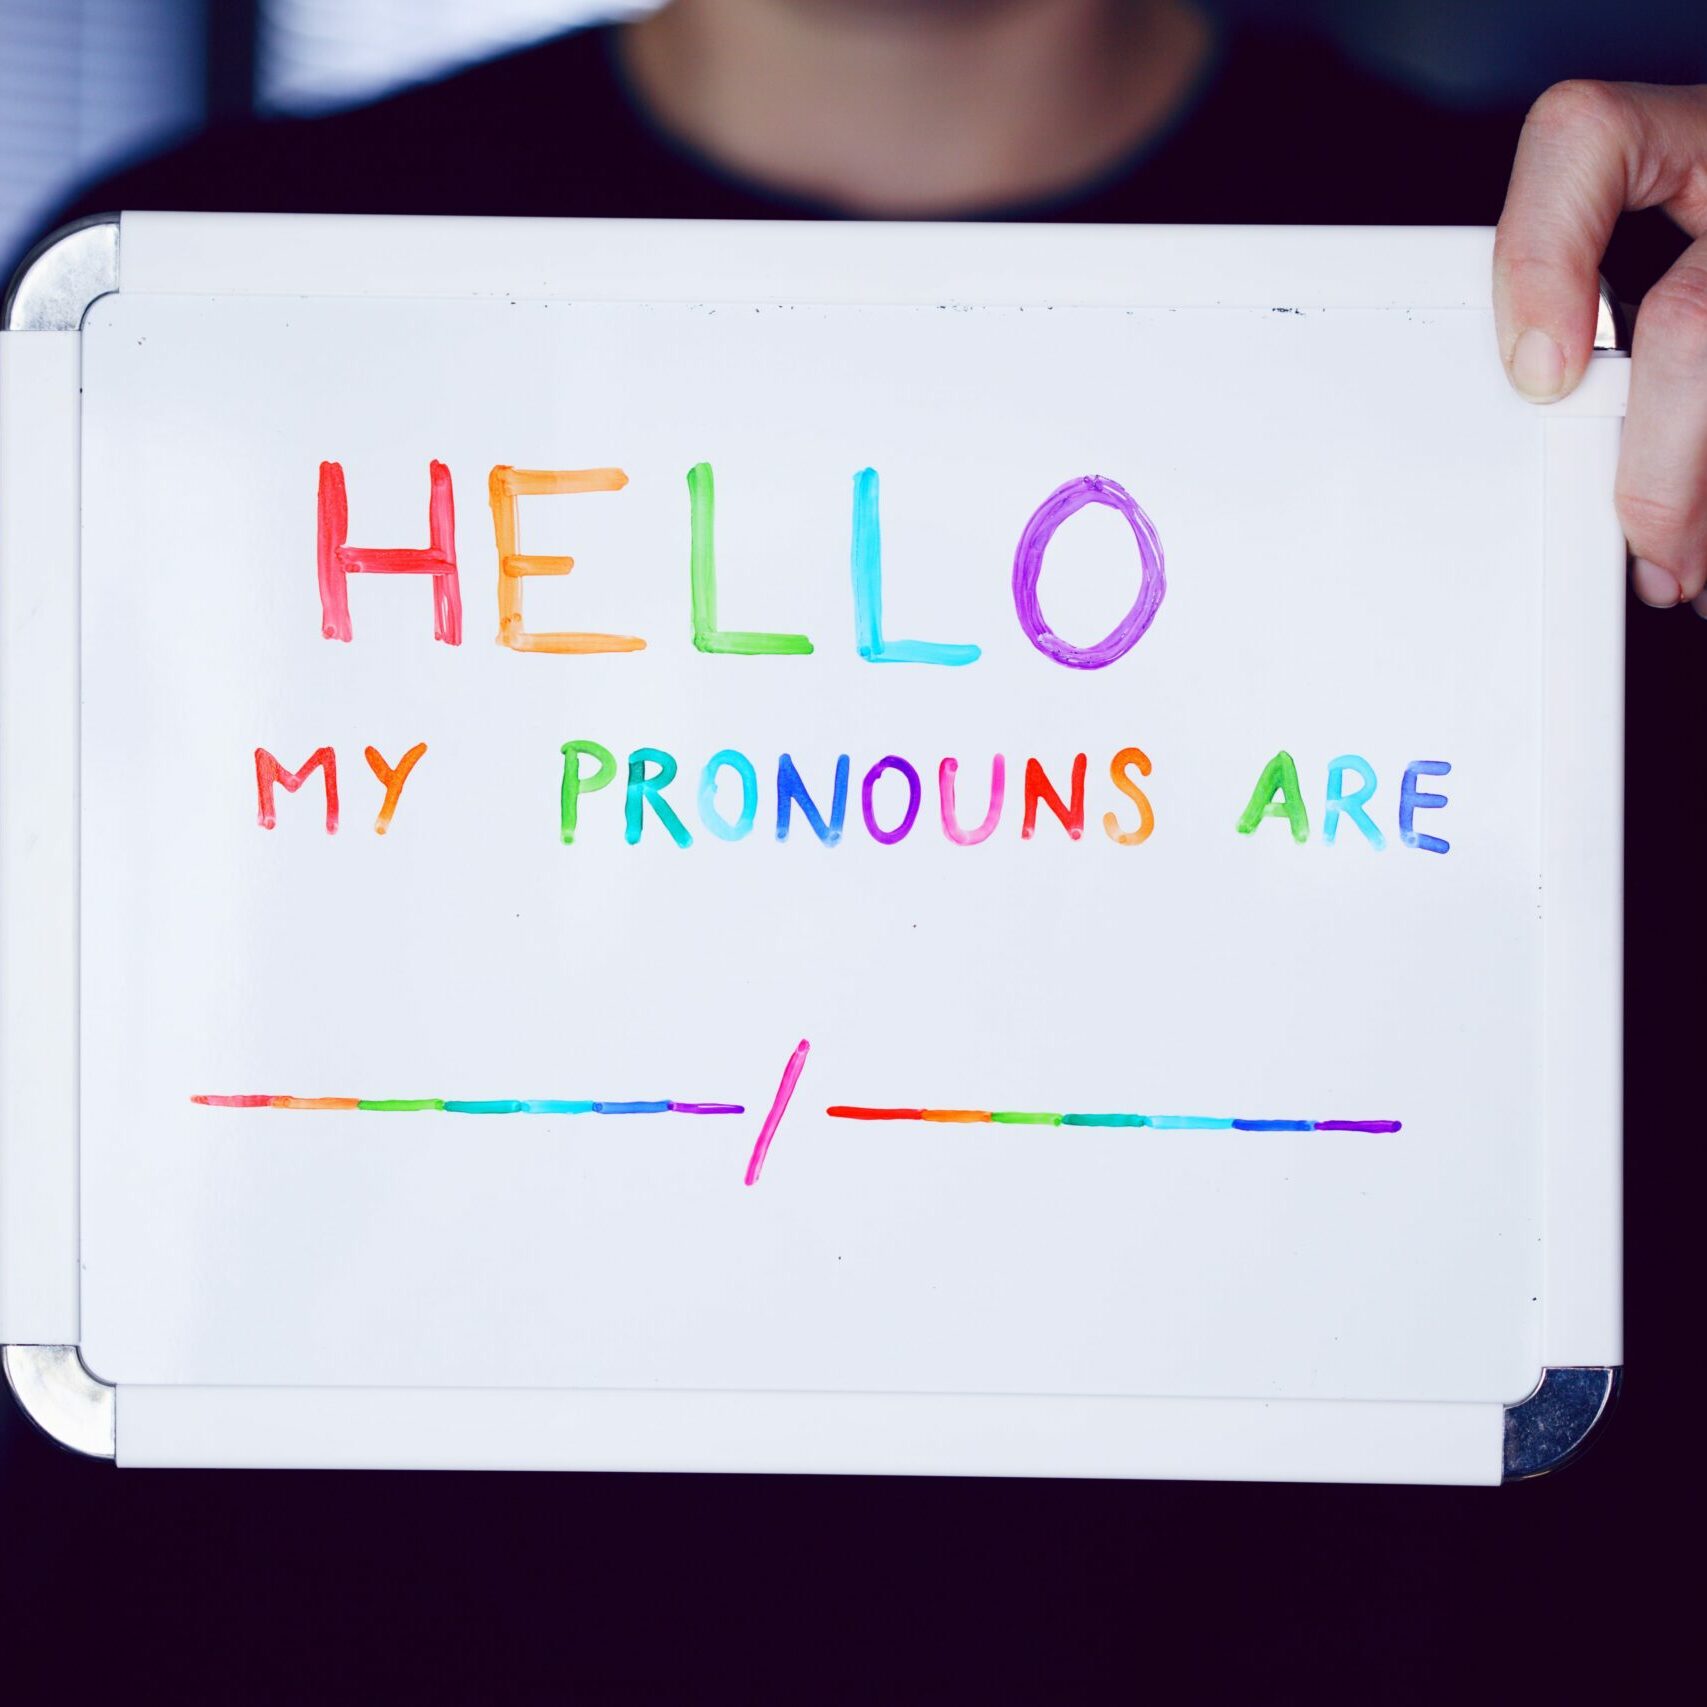 Image of a person holding a miniature size white board that says Hello my pronouns are blank/blank